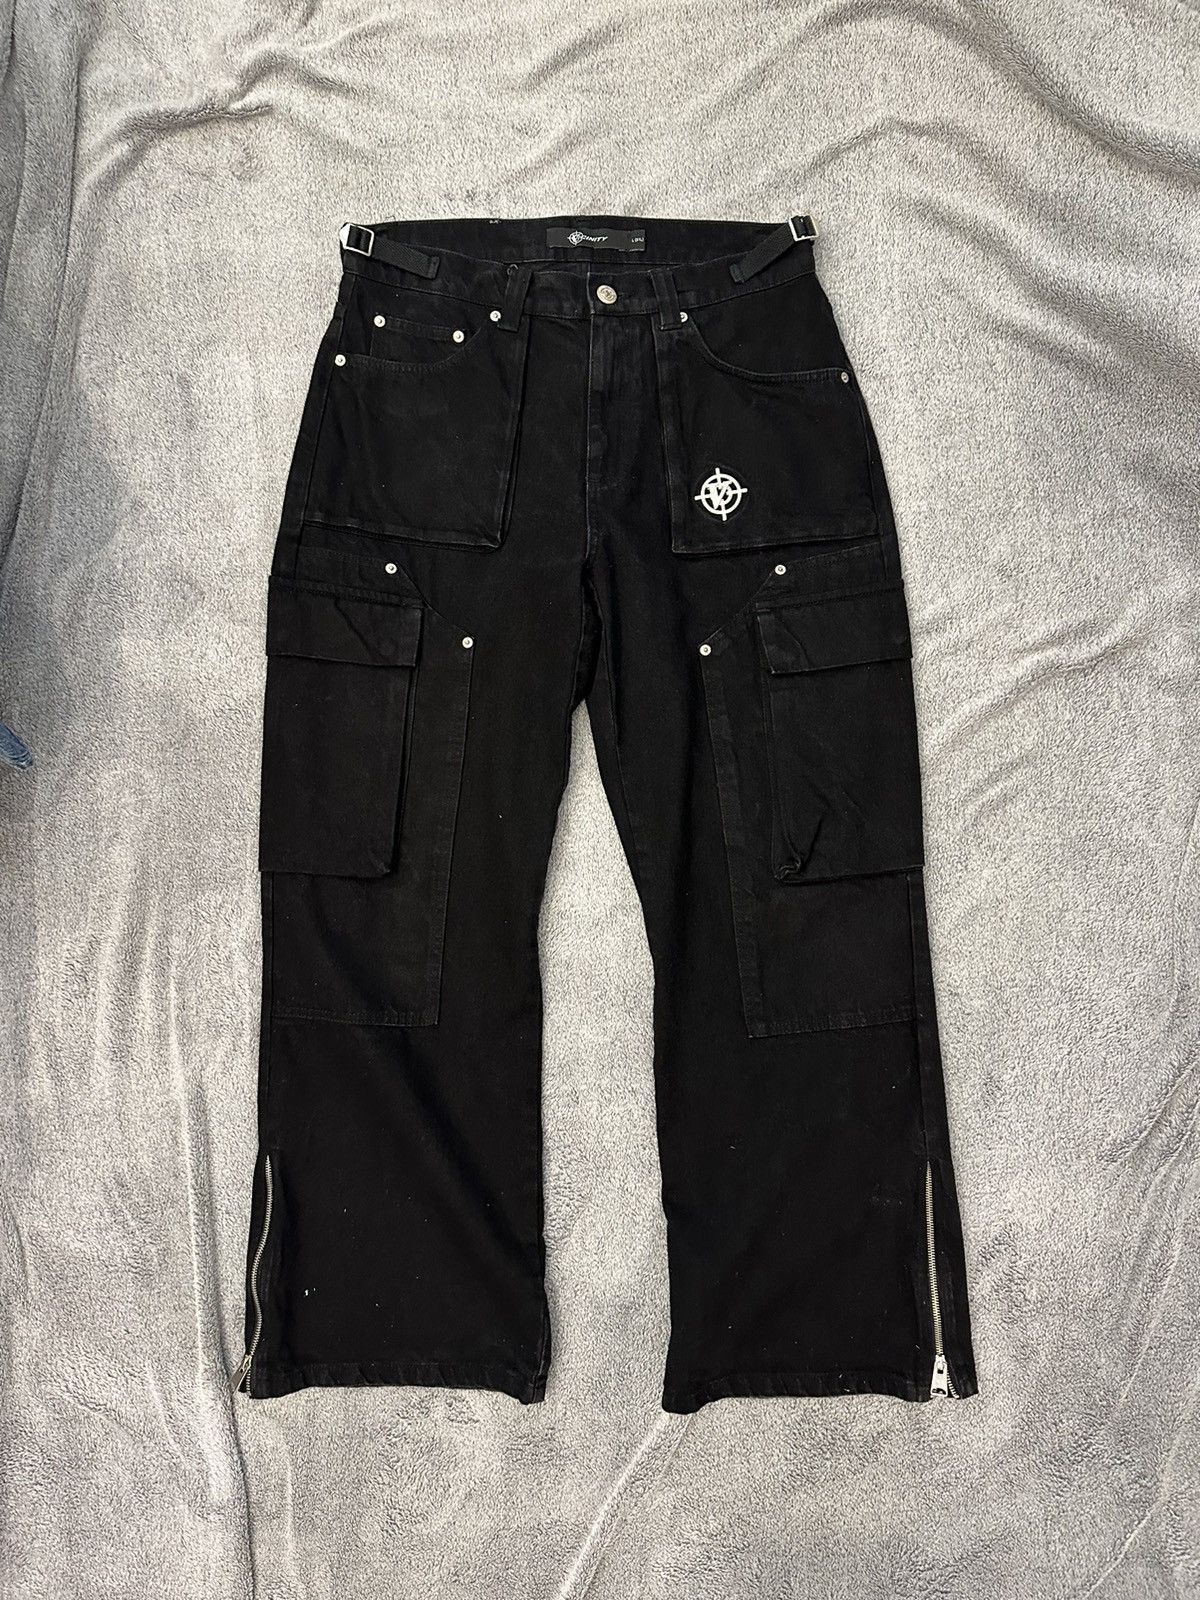 Designer Vicinity Cargo Pockets Pants Trousers | Grailed